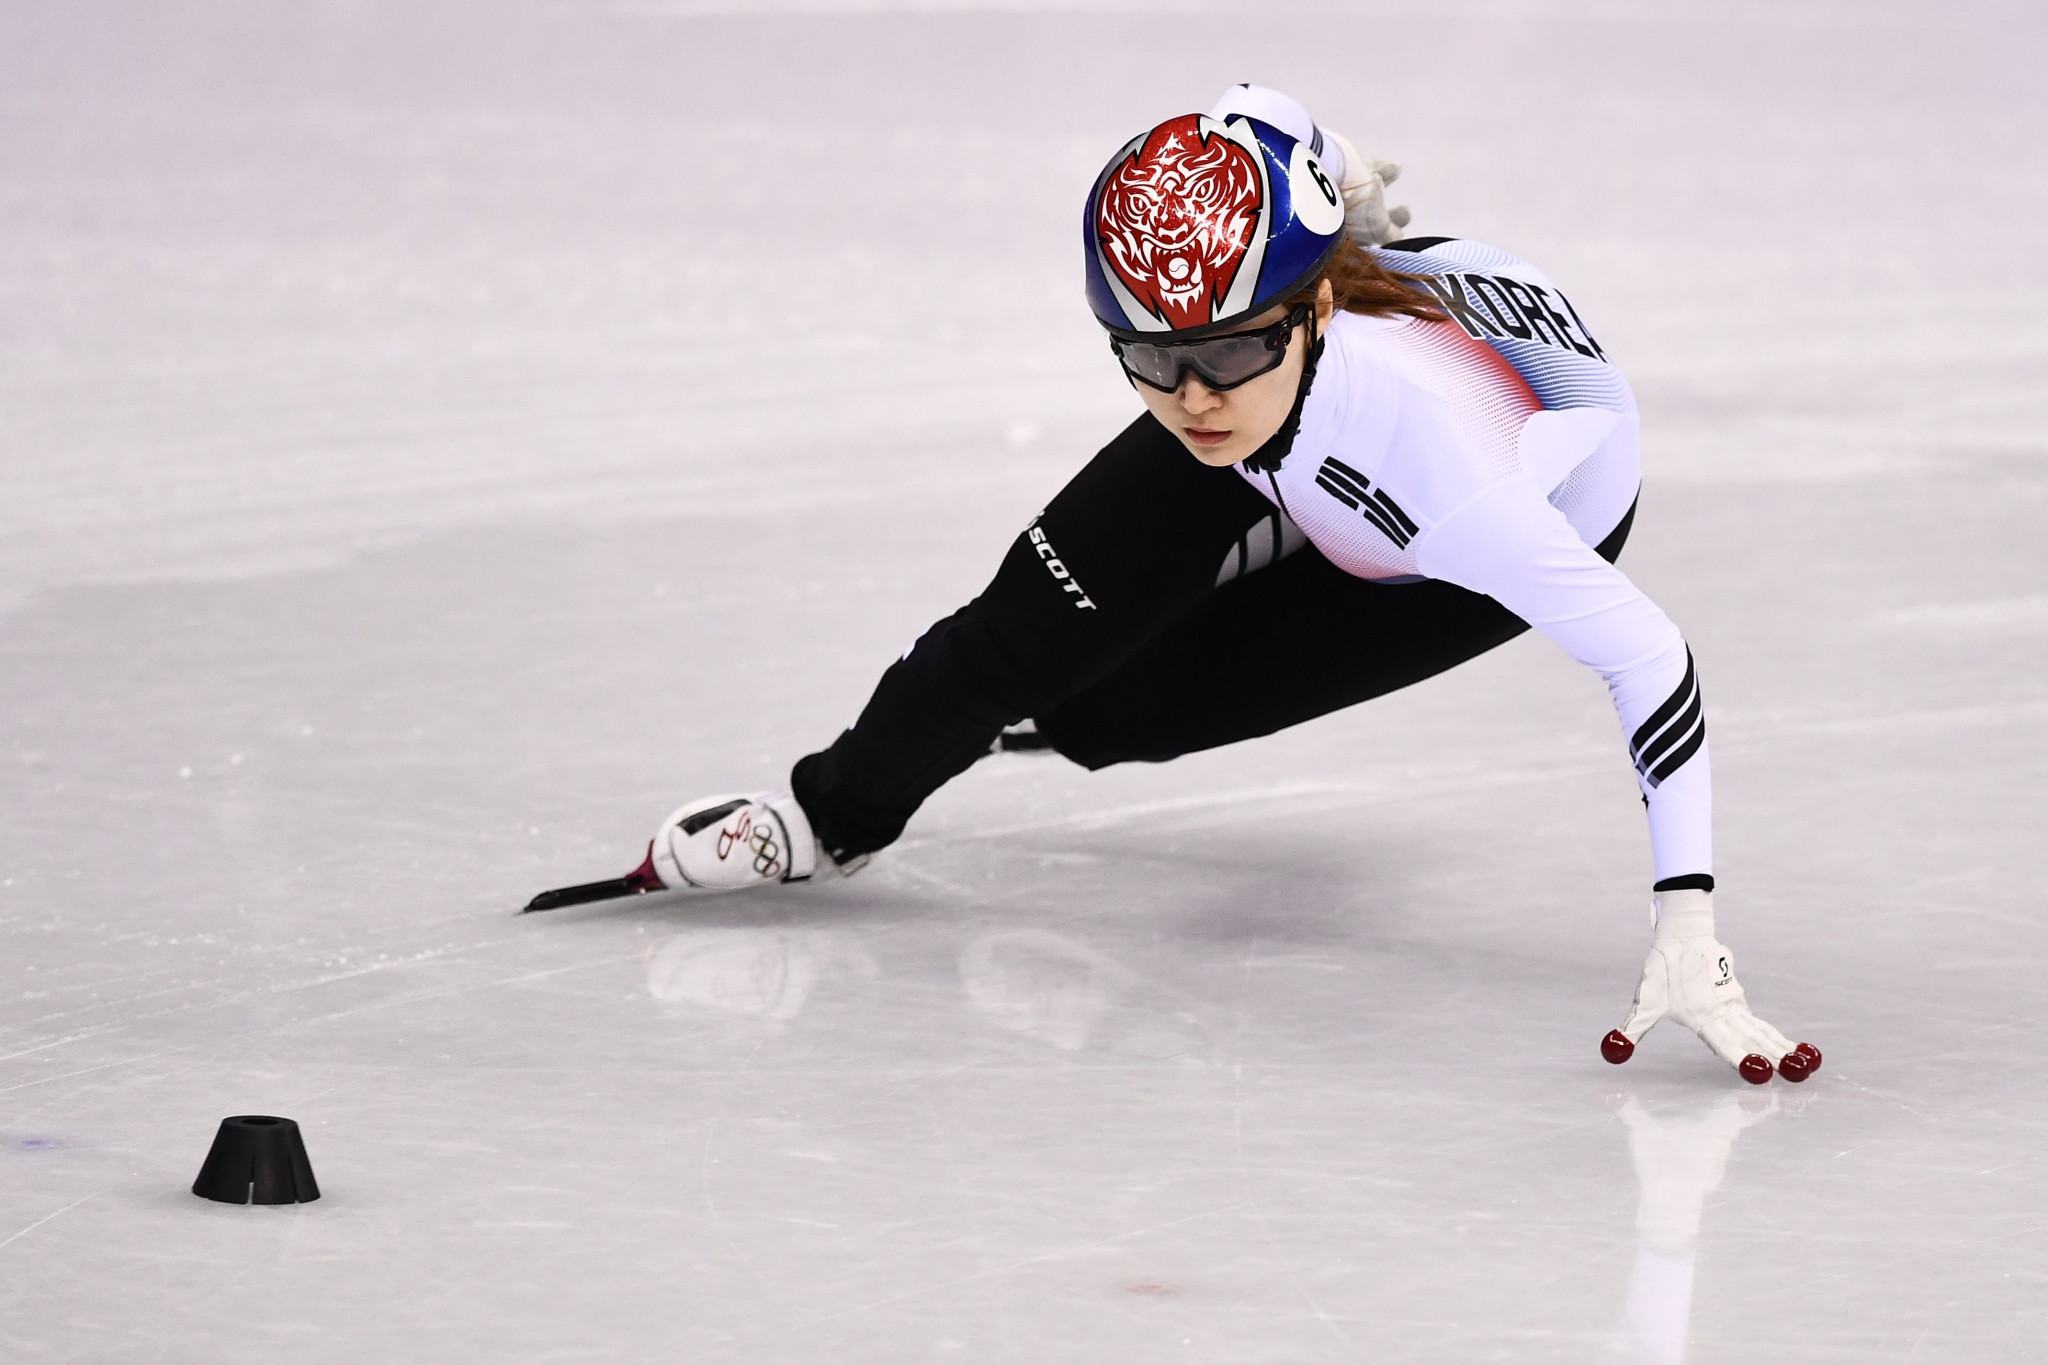 Choi makes it a hat-trick of gold medals as South Korea dominate final day of World Short Track Speed Skating Championships